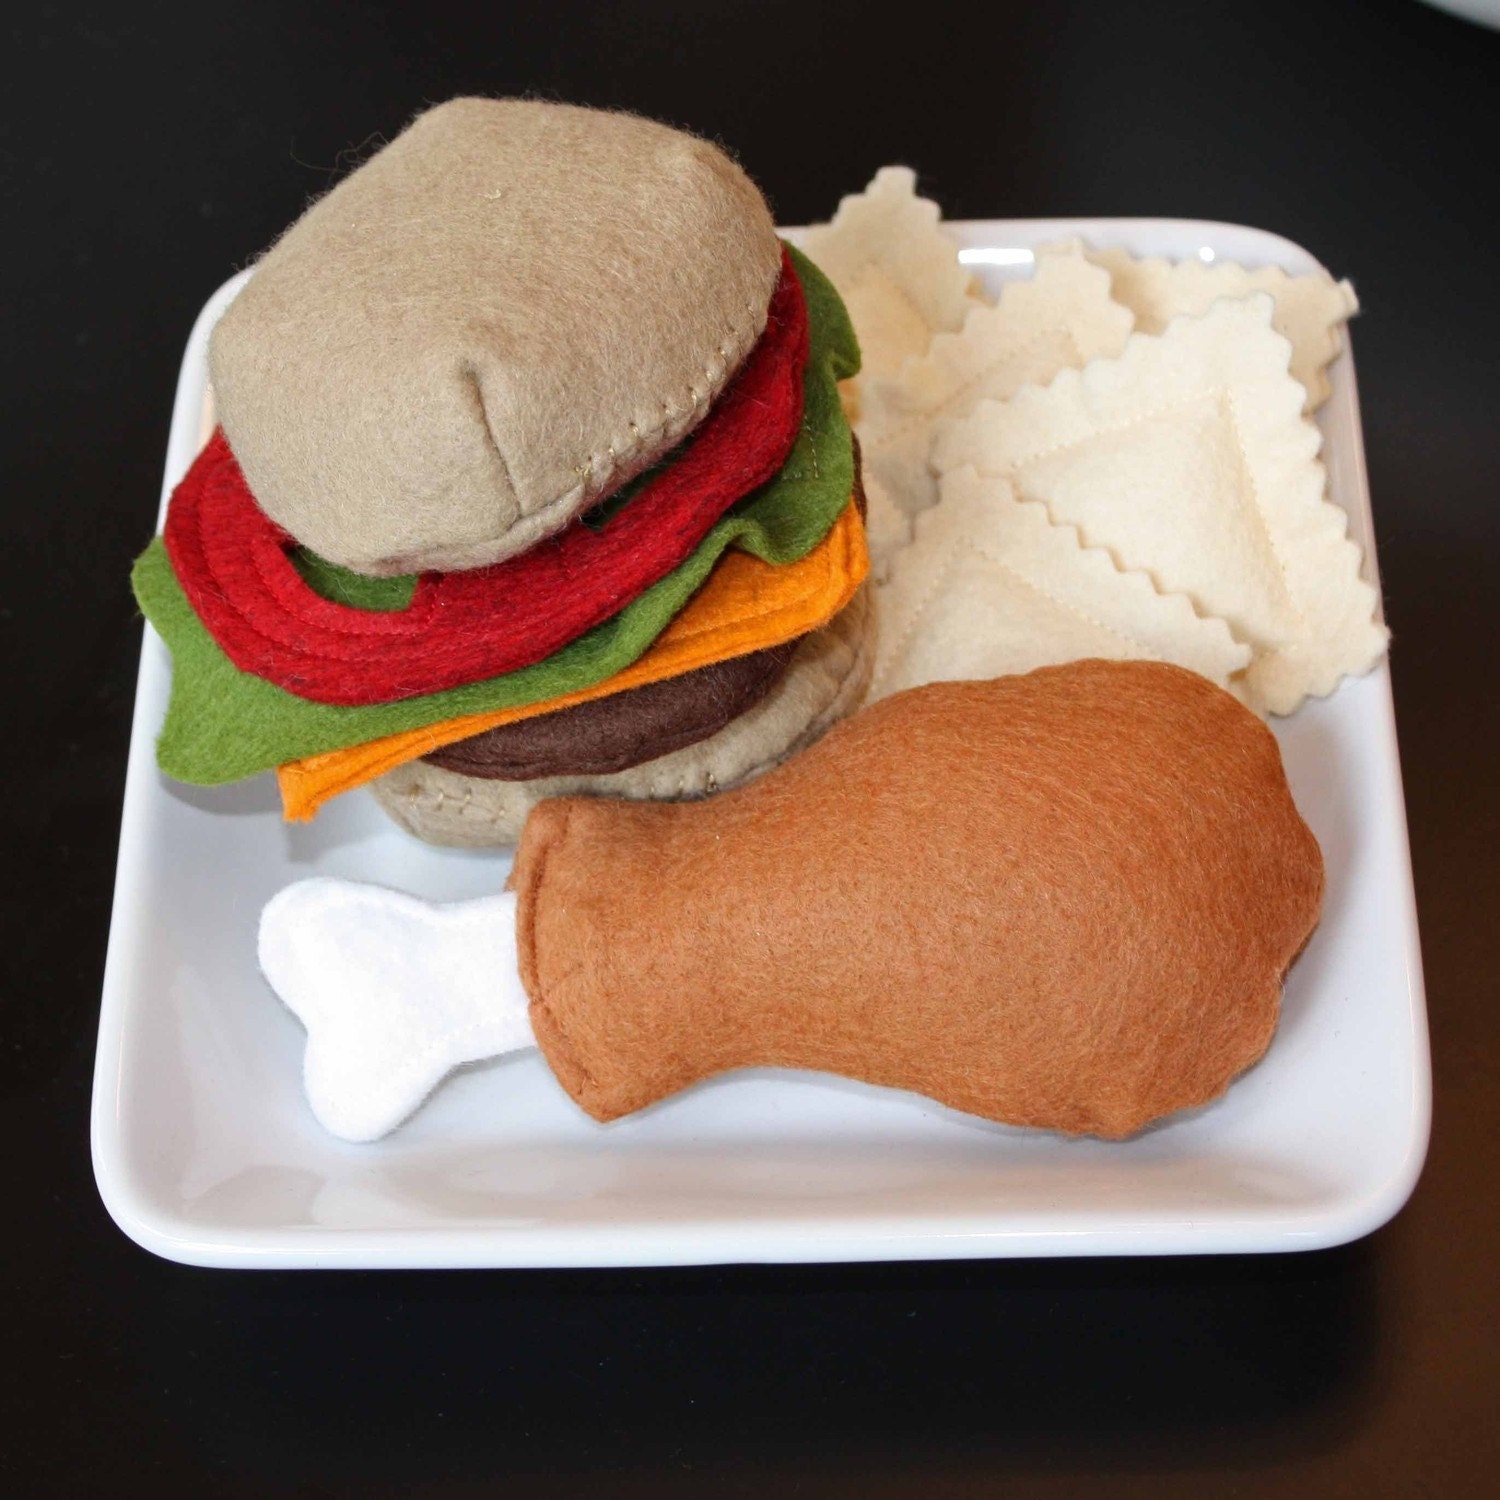 Felt Food Lunch or Dinner with a hamburger, chicken leg, and ravioli